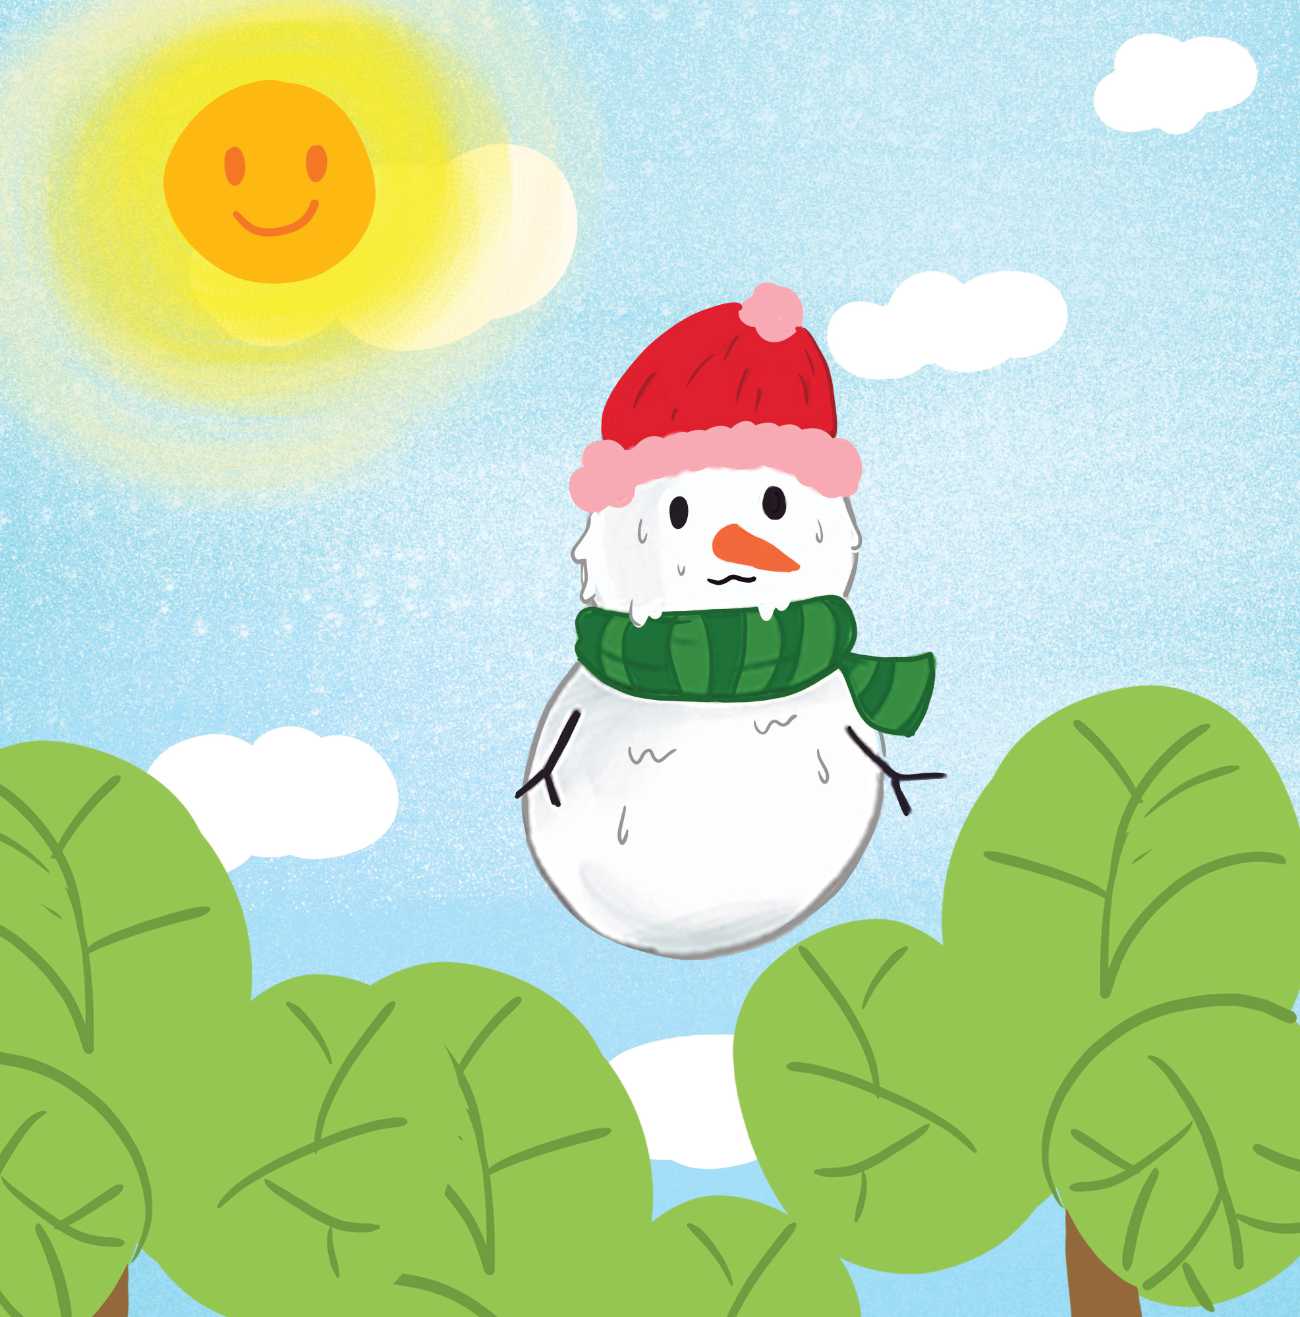 Bedtime Stories A Summer Snowman short stories for kids page 30